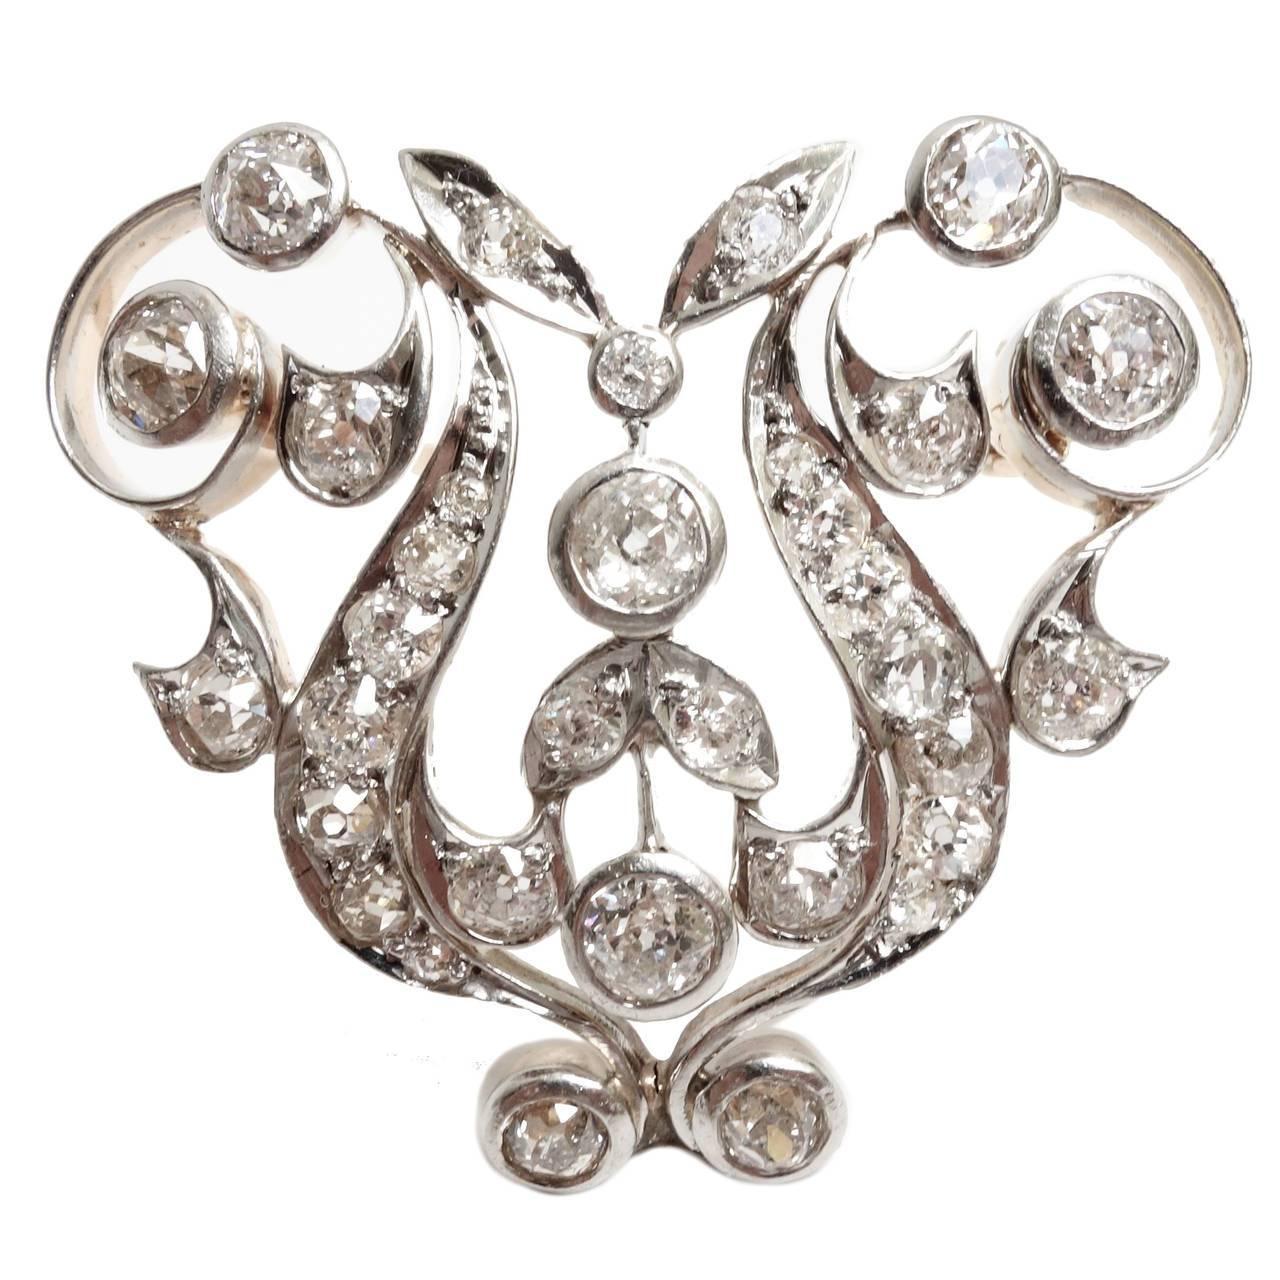 Belle Epoque  diamond brooch conversion with a sweeping floral and foliate motif, crafted in Platinum and 14K yellow gold, supported by an 18K yellow gold rolo style chain. Fully set with old mine cut bead and bezel set diamonds, approximate total